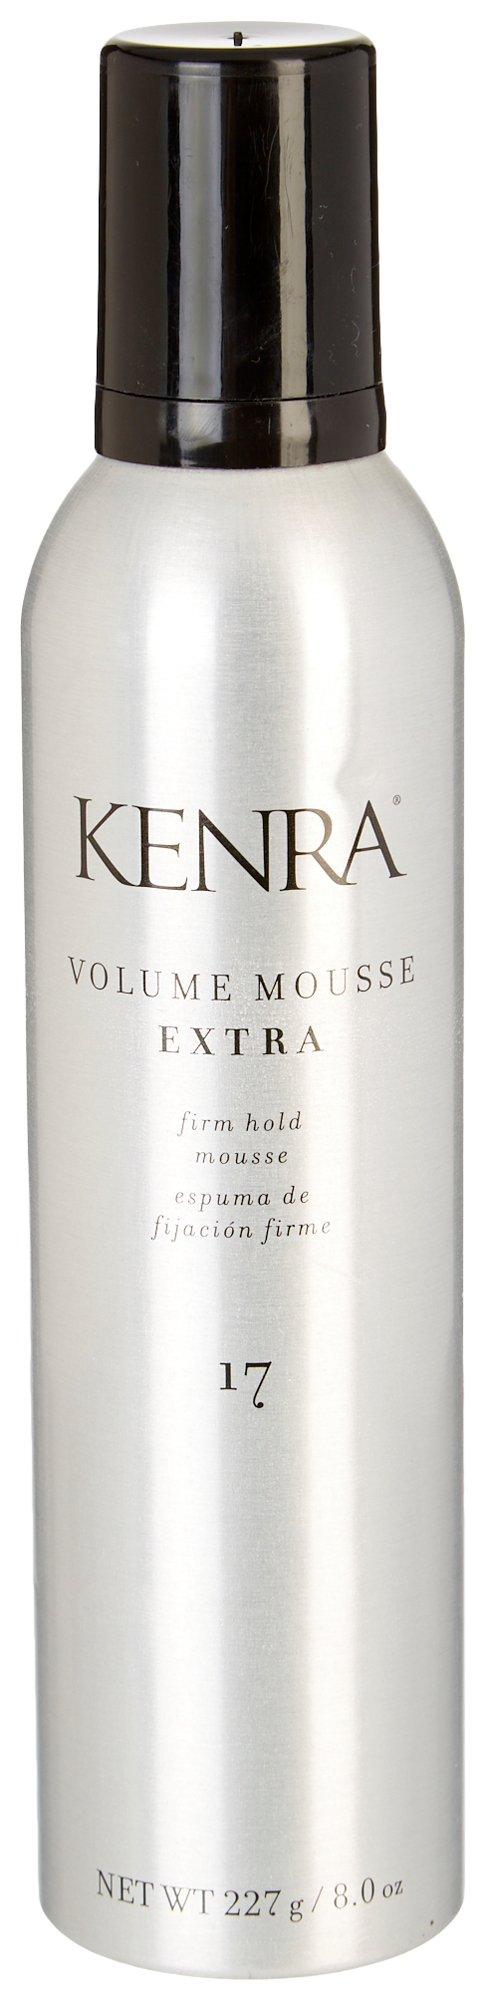 Firm Hold Extra Volume Mousse 17 8 oz.